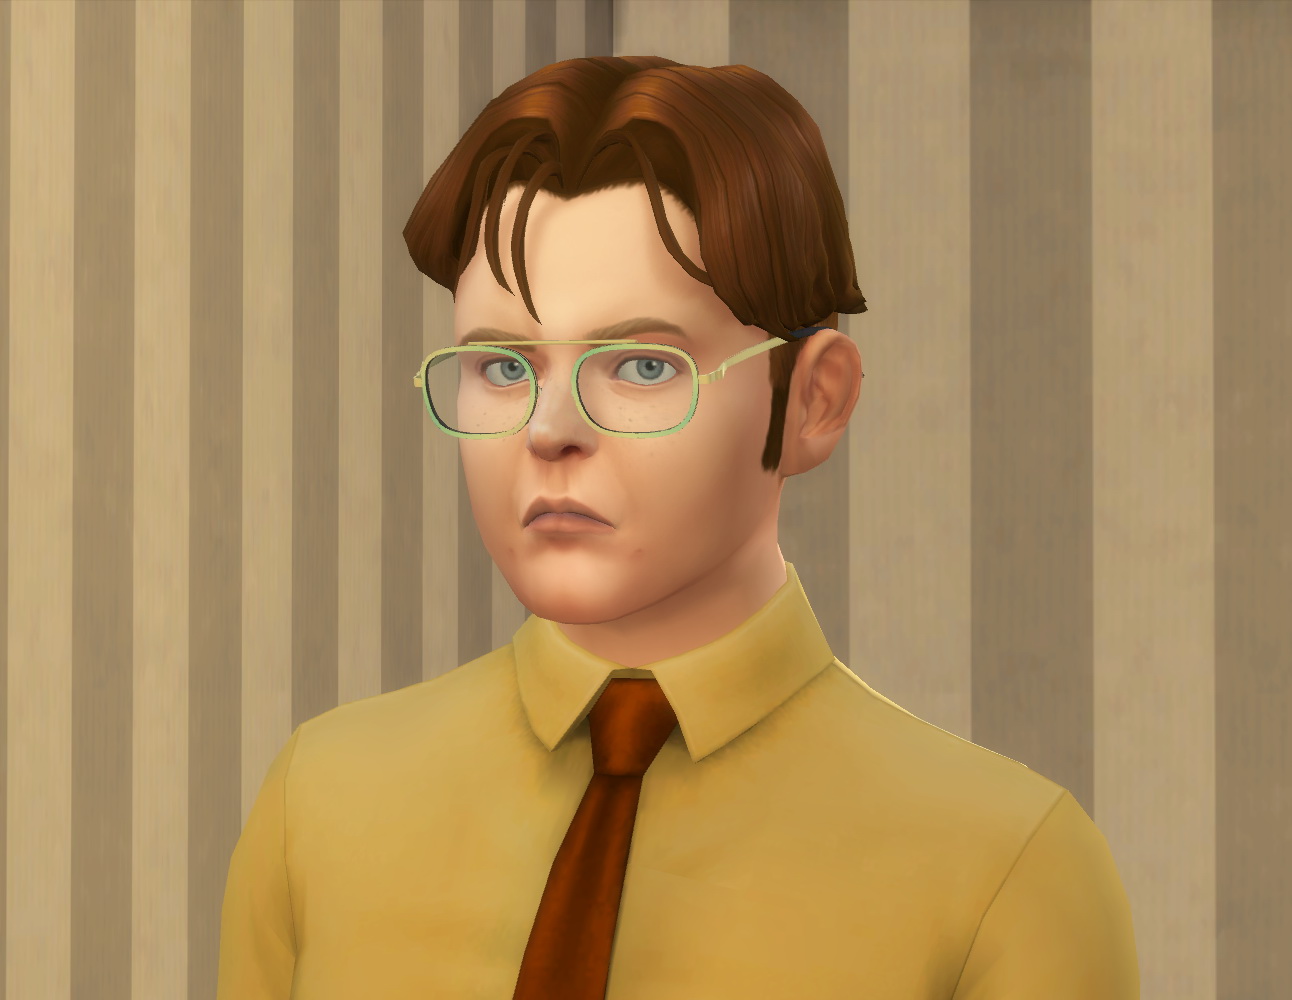 Dwight Schrute by mobichiro from Mod The Sims • Sims 4 Downloads